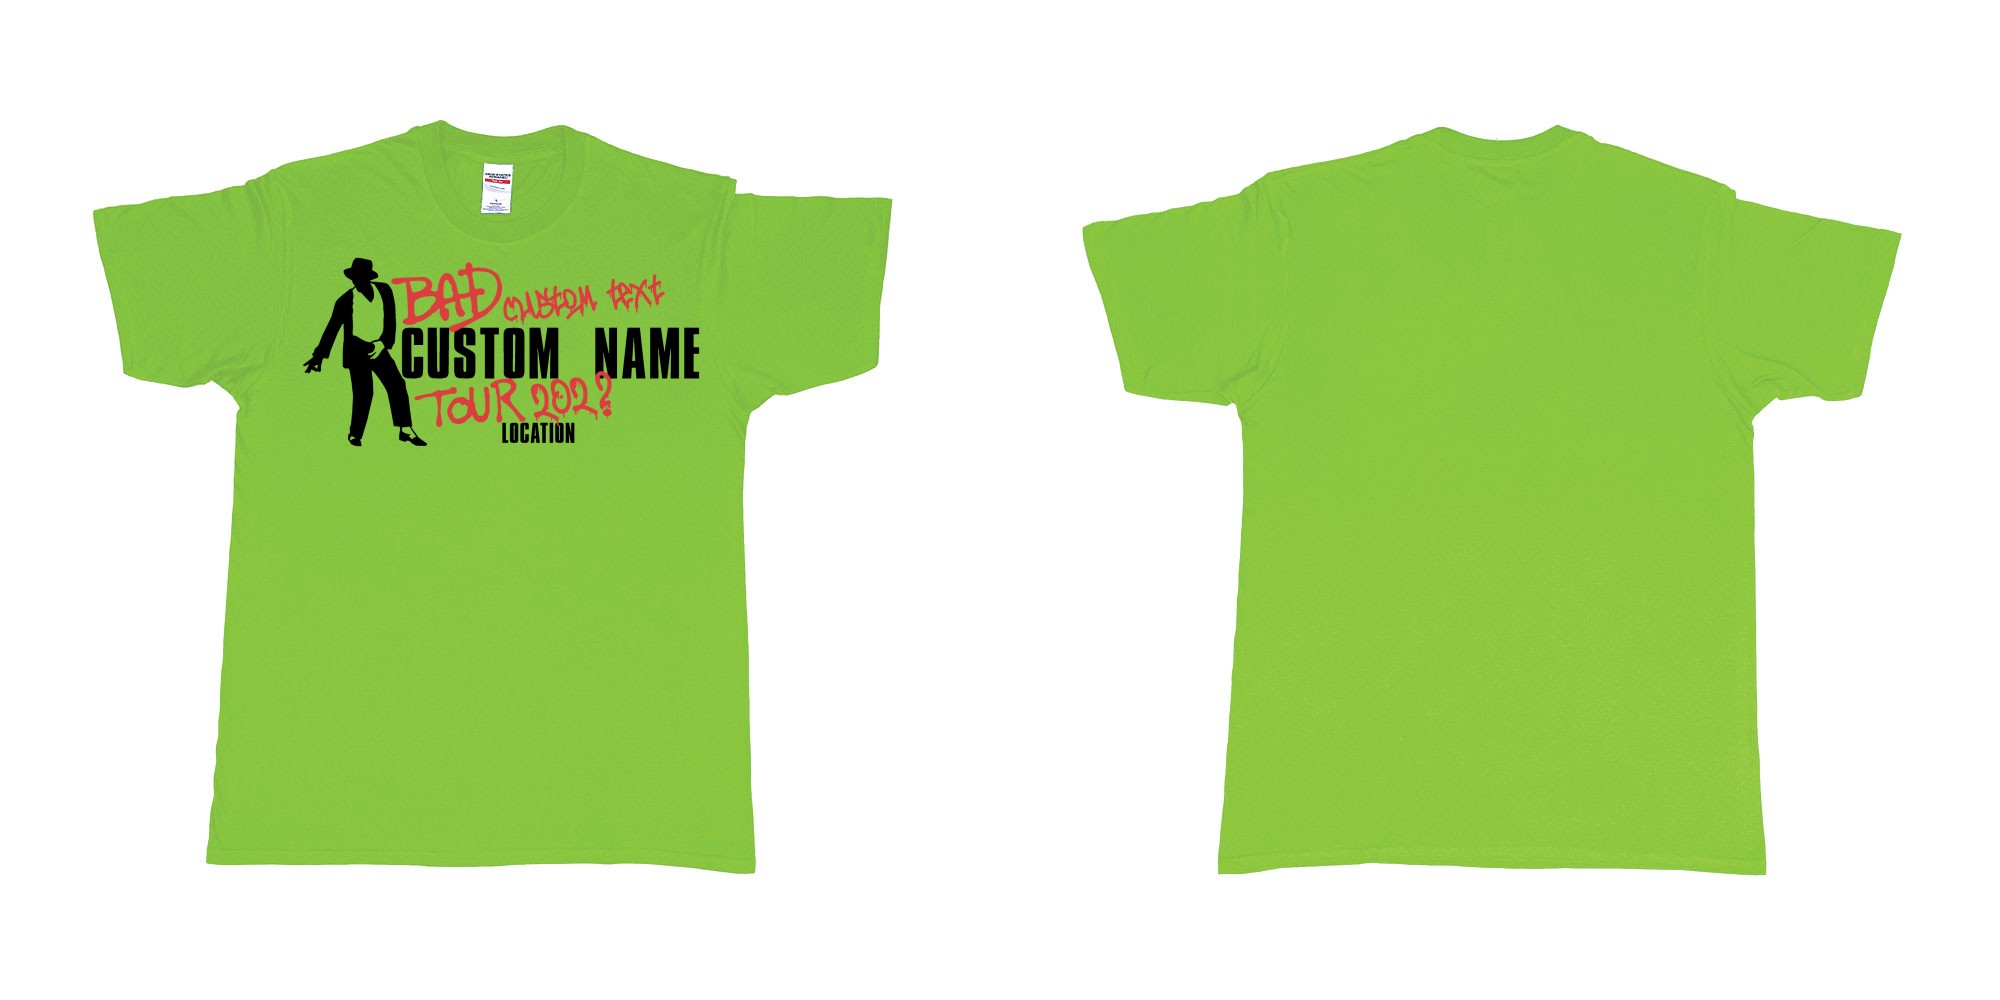 Custom tshirt design michael jackson bad tour custom name year location in fabric color lime choice your own text made in Bali by The Pirate Way